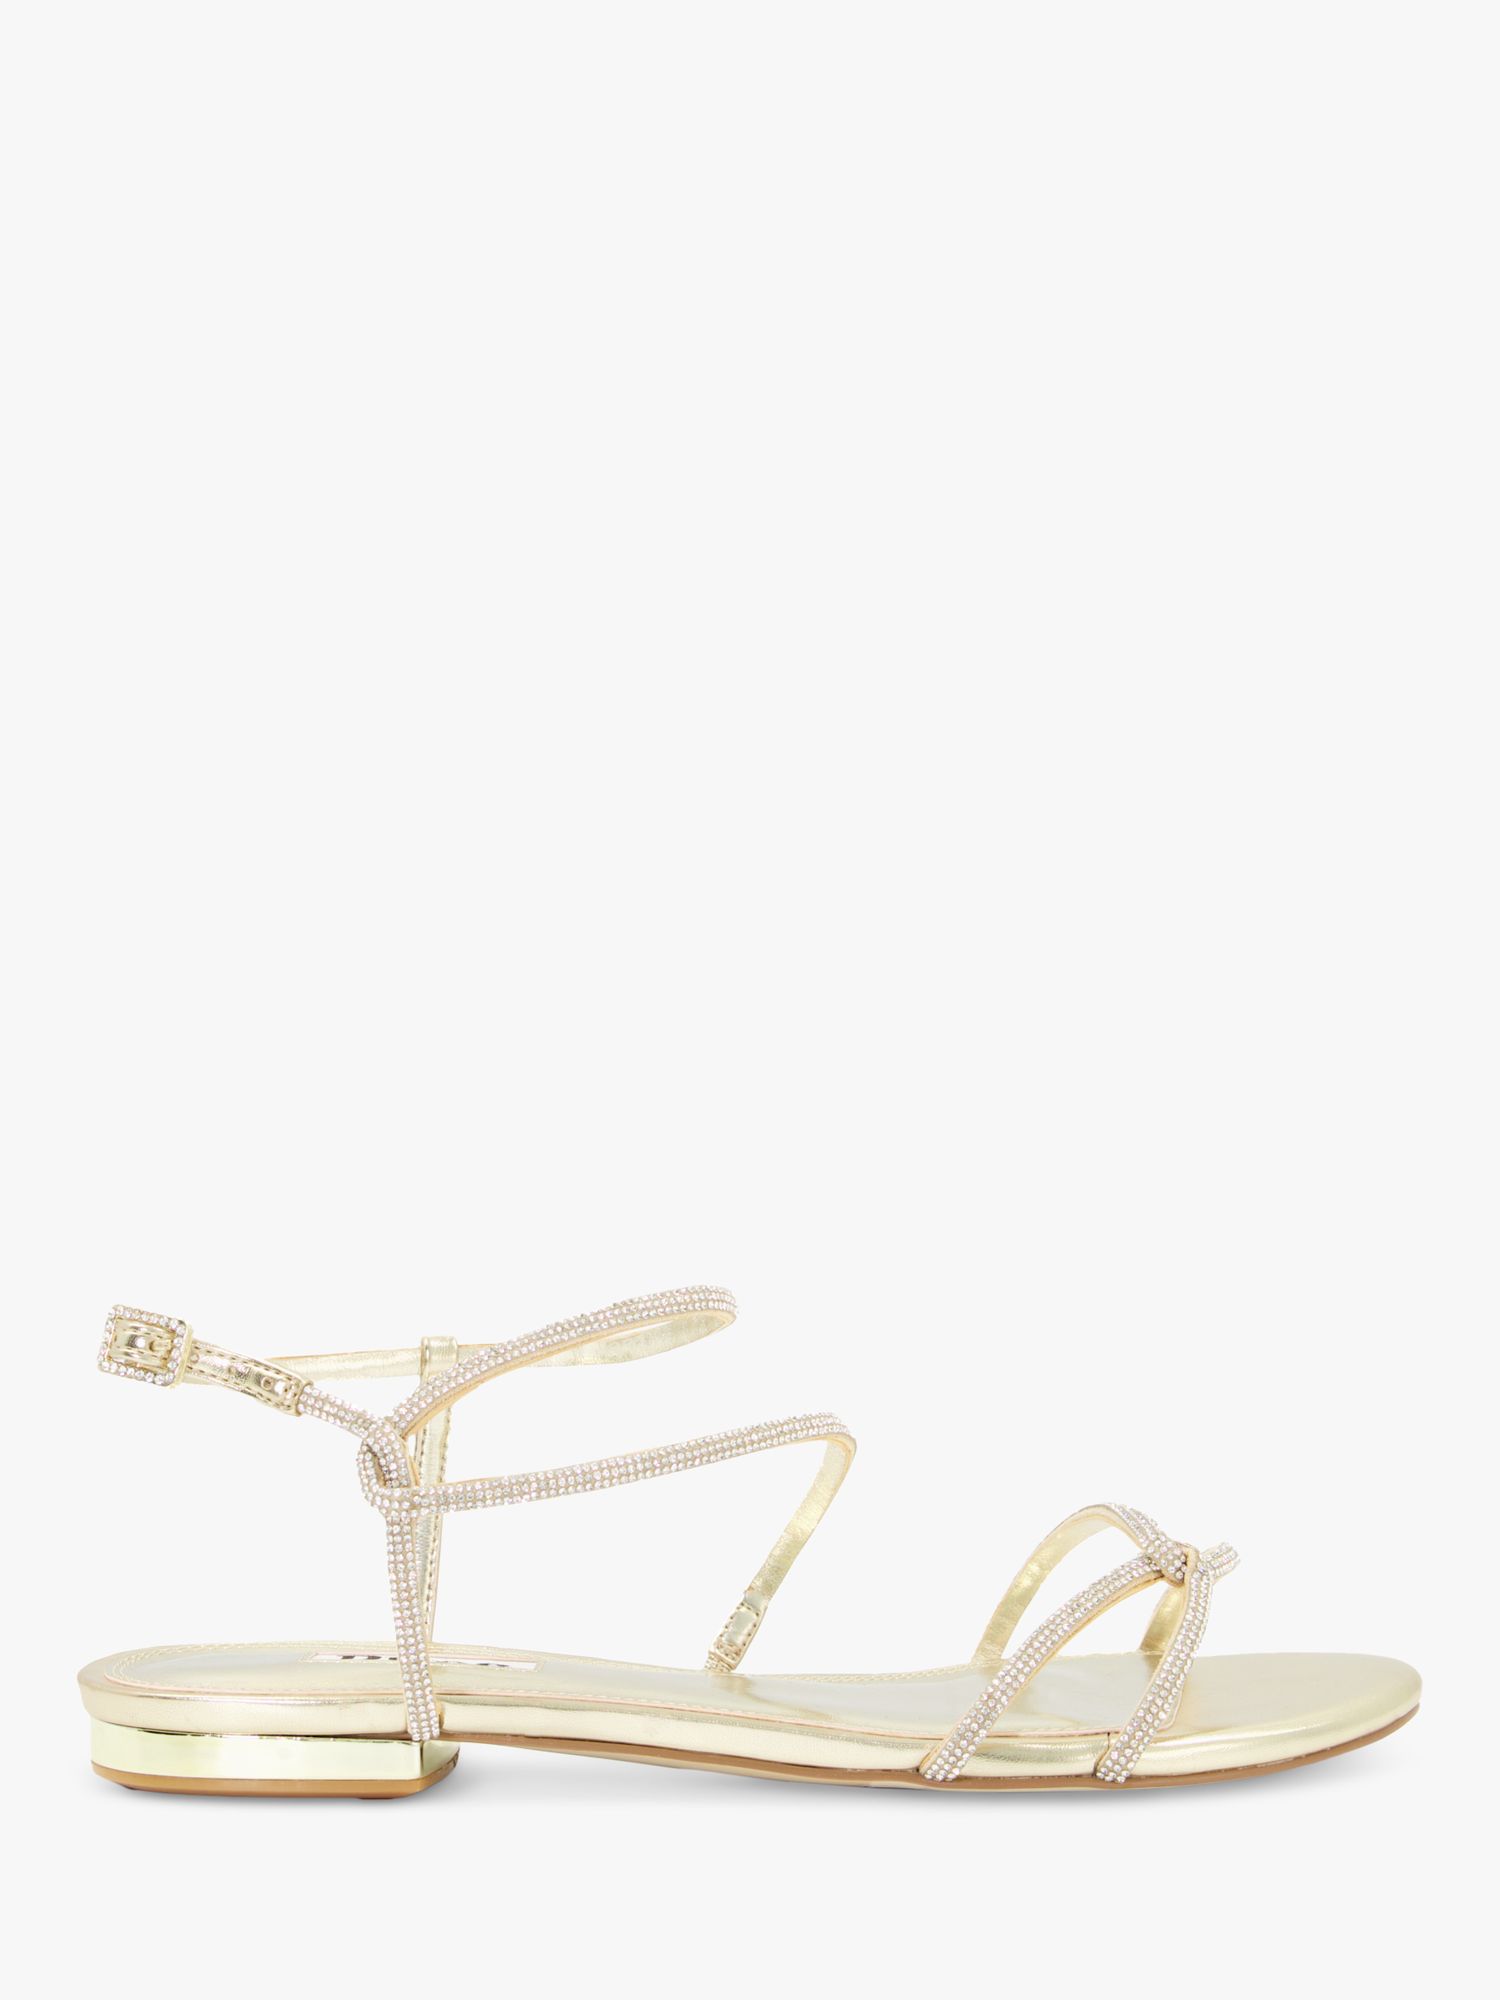 Dune Wide Fit Nightly Jewel Sandals, Champagne